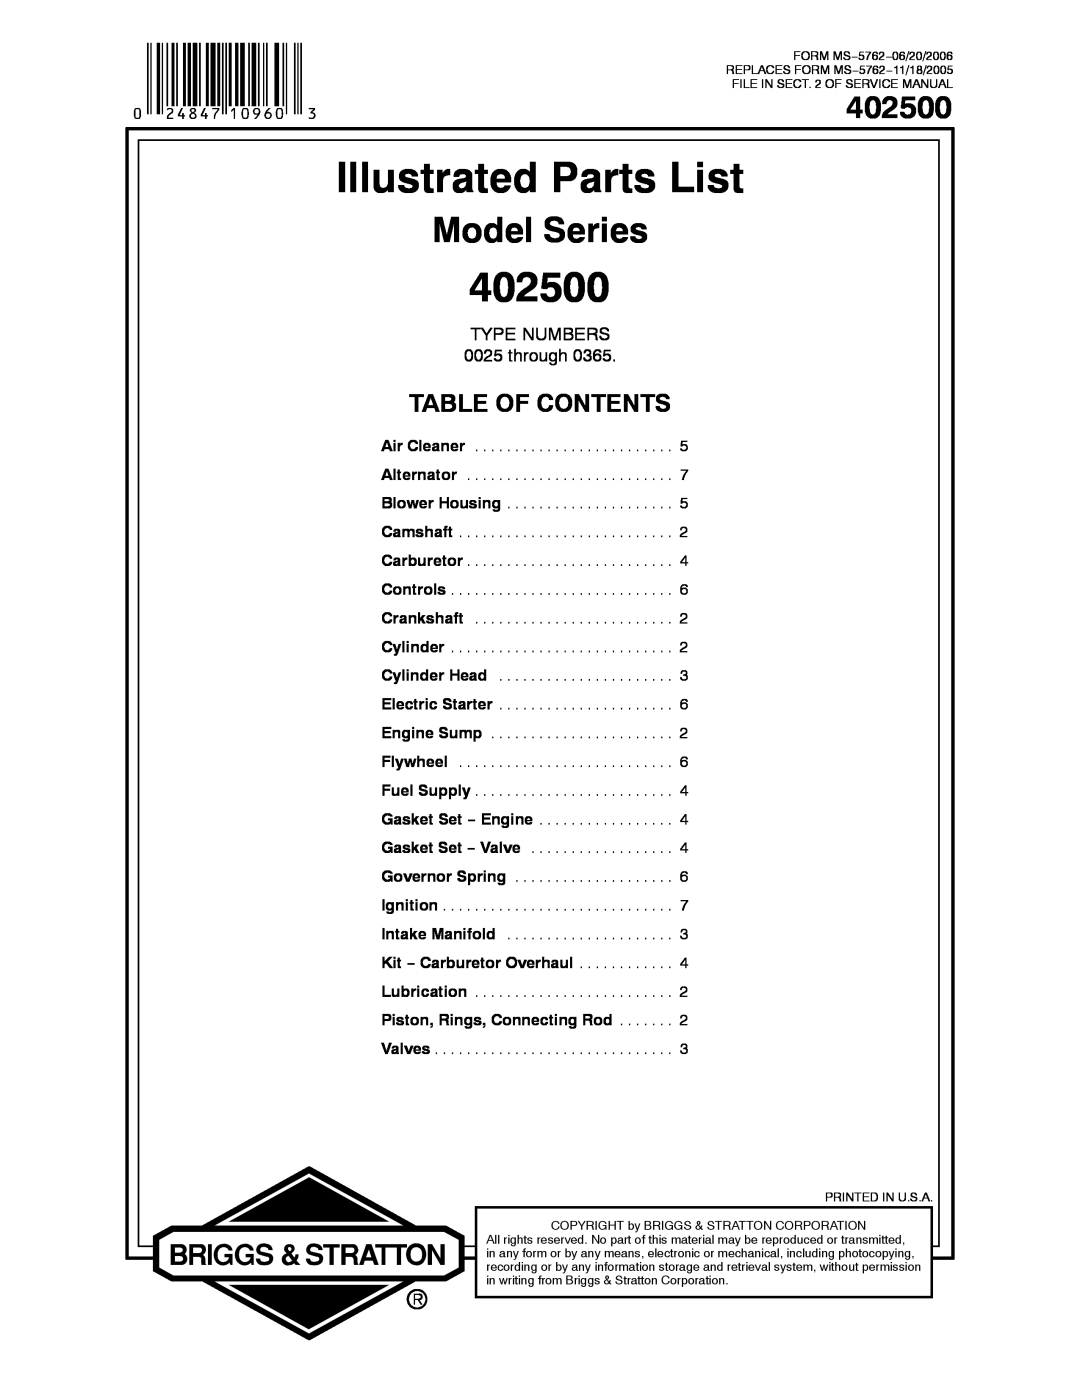 Briggs & Stratton 402500 service manual Illustrated Parts List, Model Series, Table Of Contents, TYPE NUMBERS 0025 through 